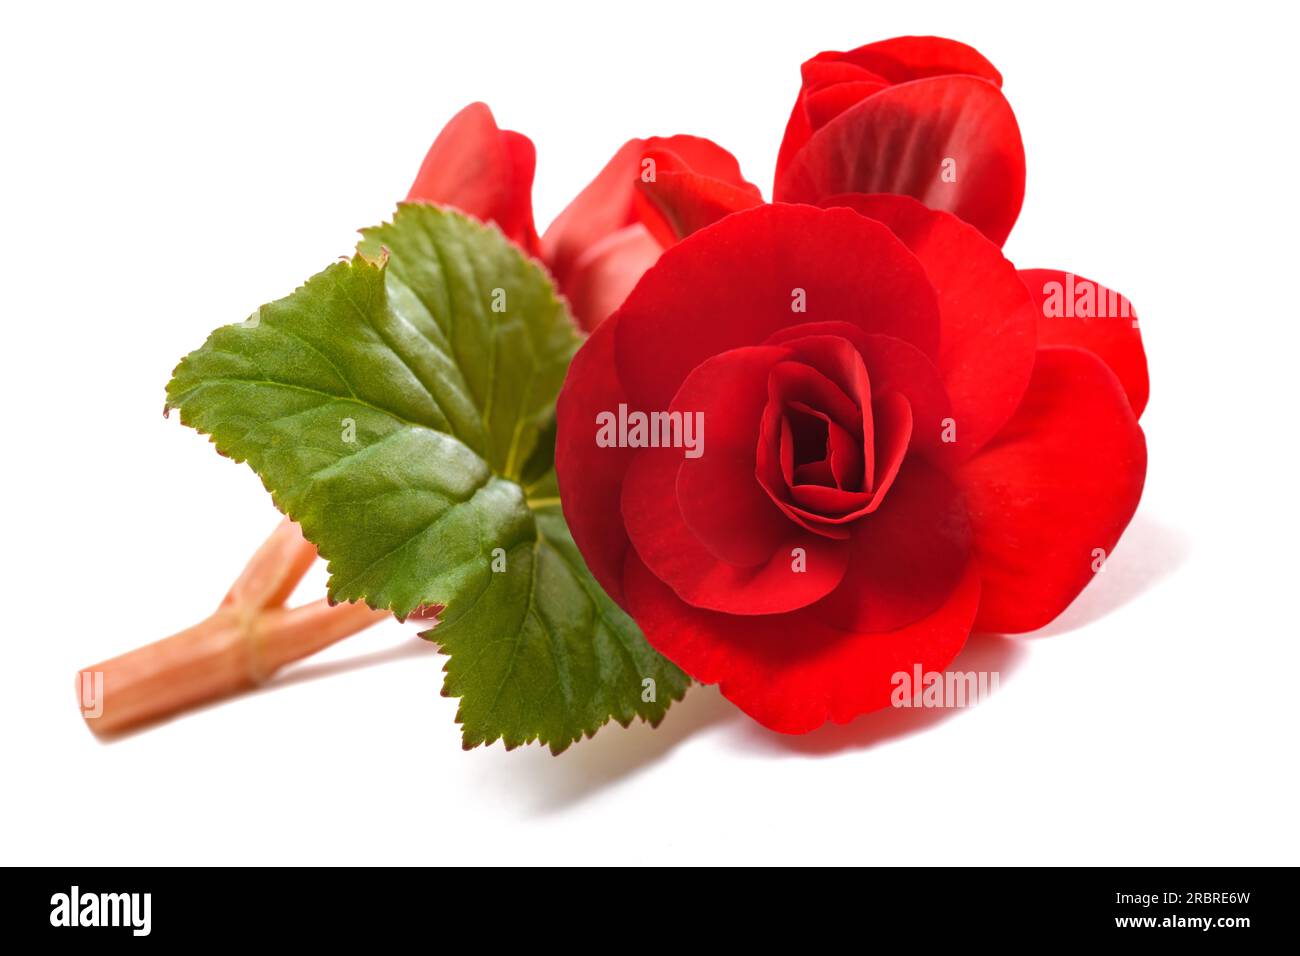 Red Begonia flower isolated on white background Stock Photo